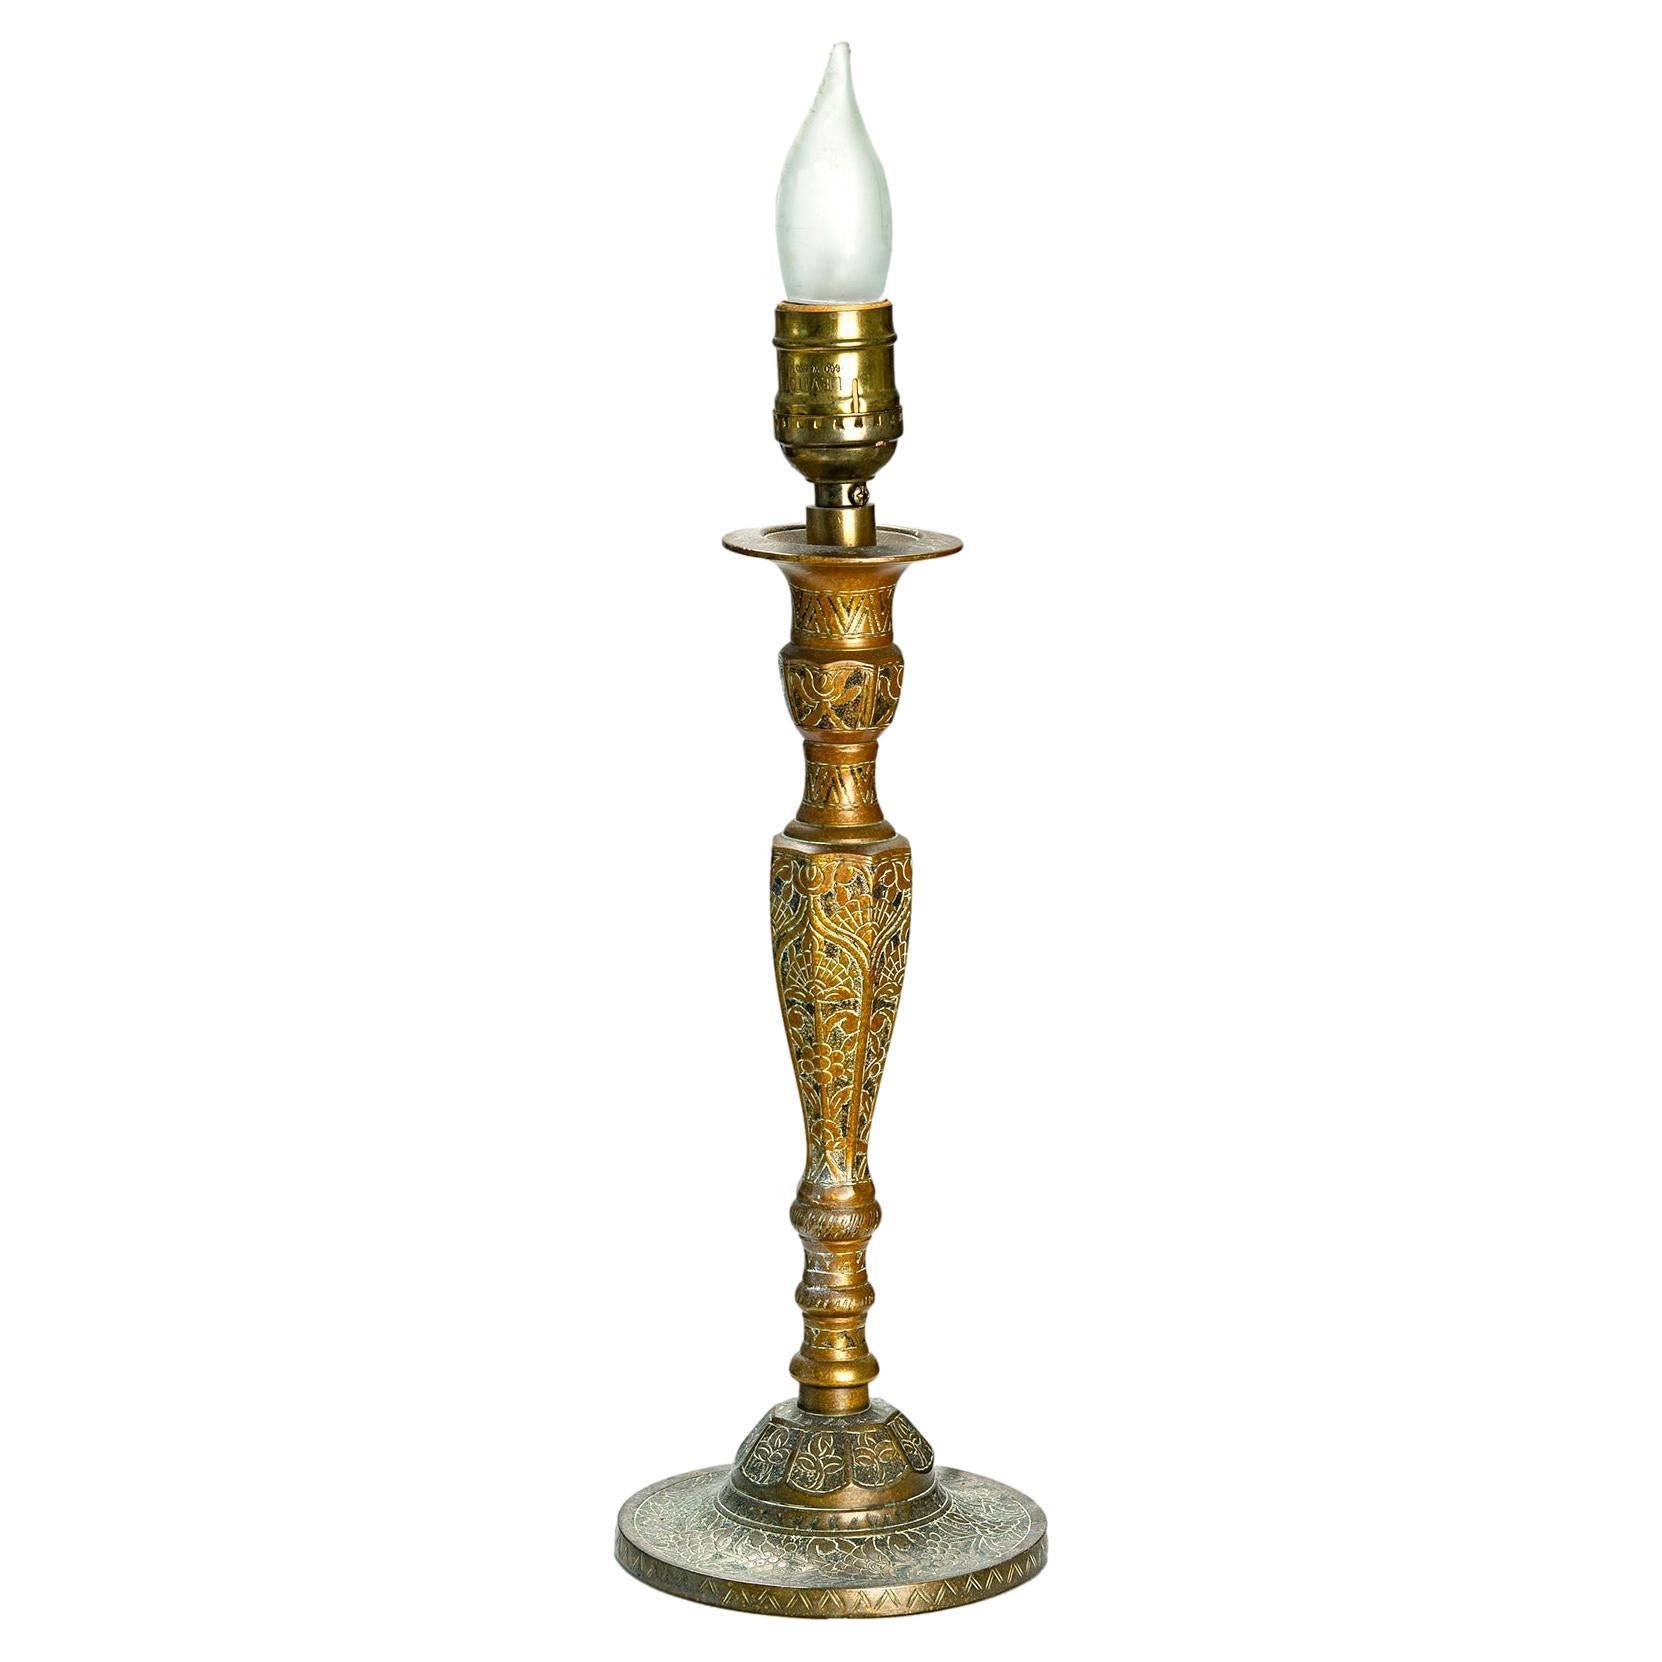 Very heavy & solid Boho style engraved candlestick converted into a lamp. Wired with inline roller switch on a long cord. 
RH silk clip on shade is included.
Very heavy & solid candlestick converted into lamps. 
No makers mark.